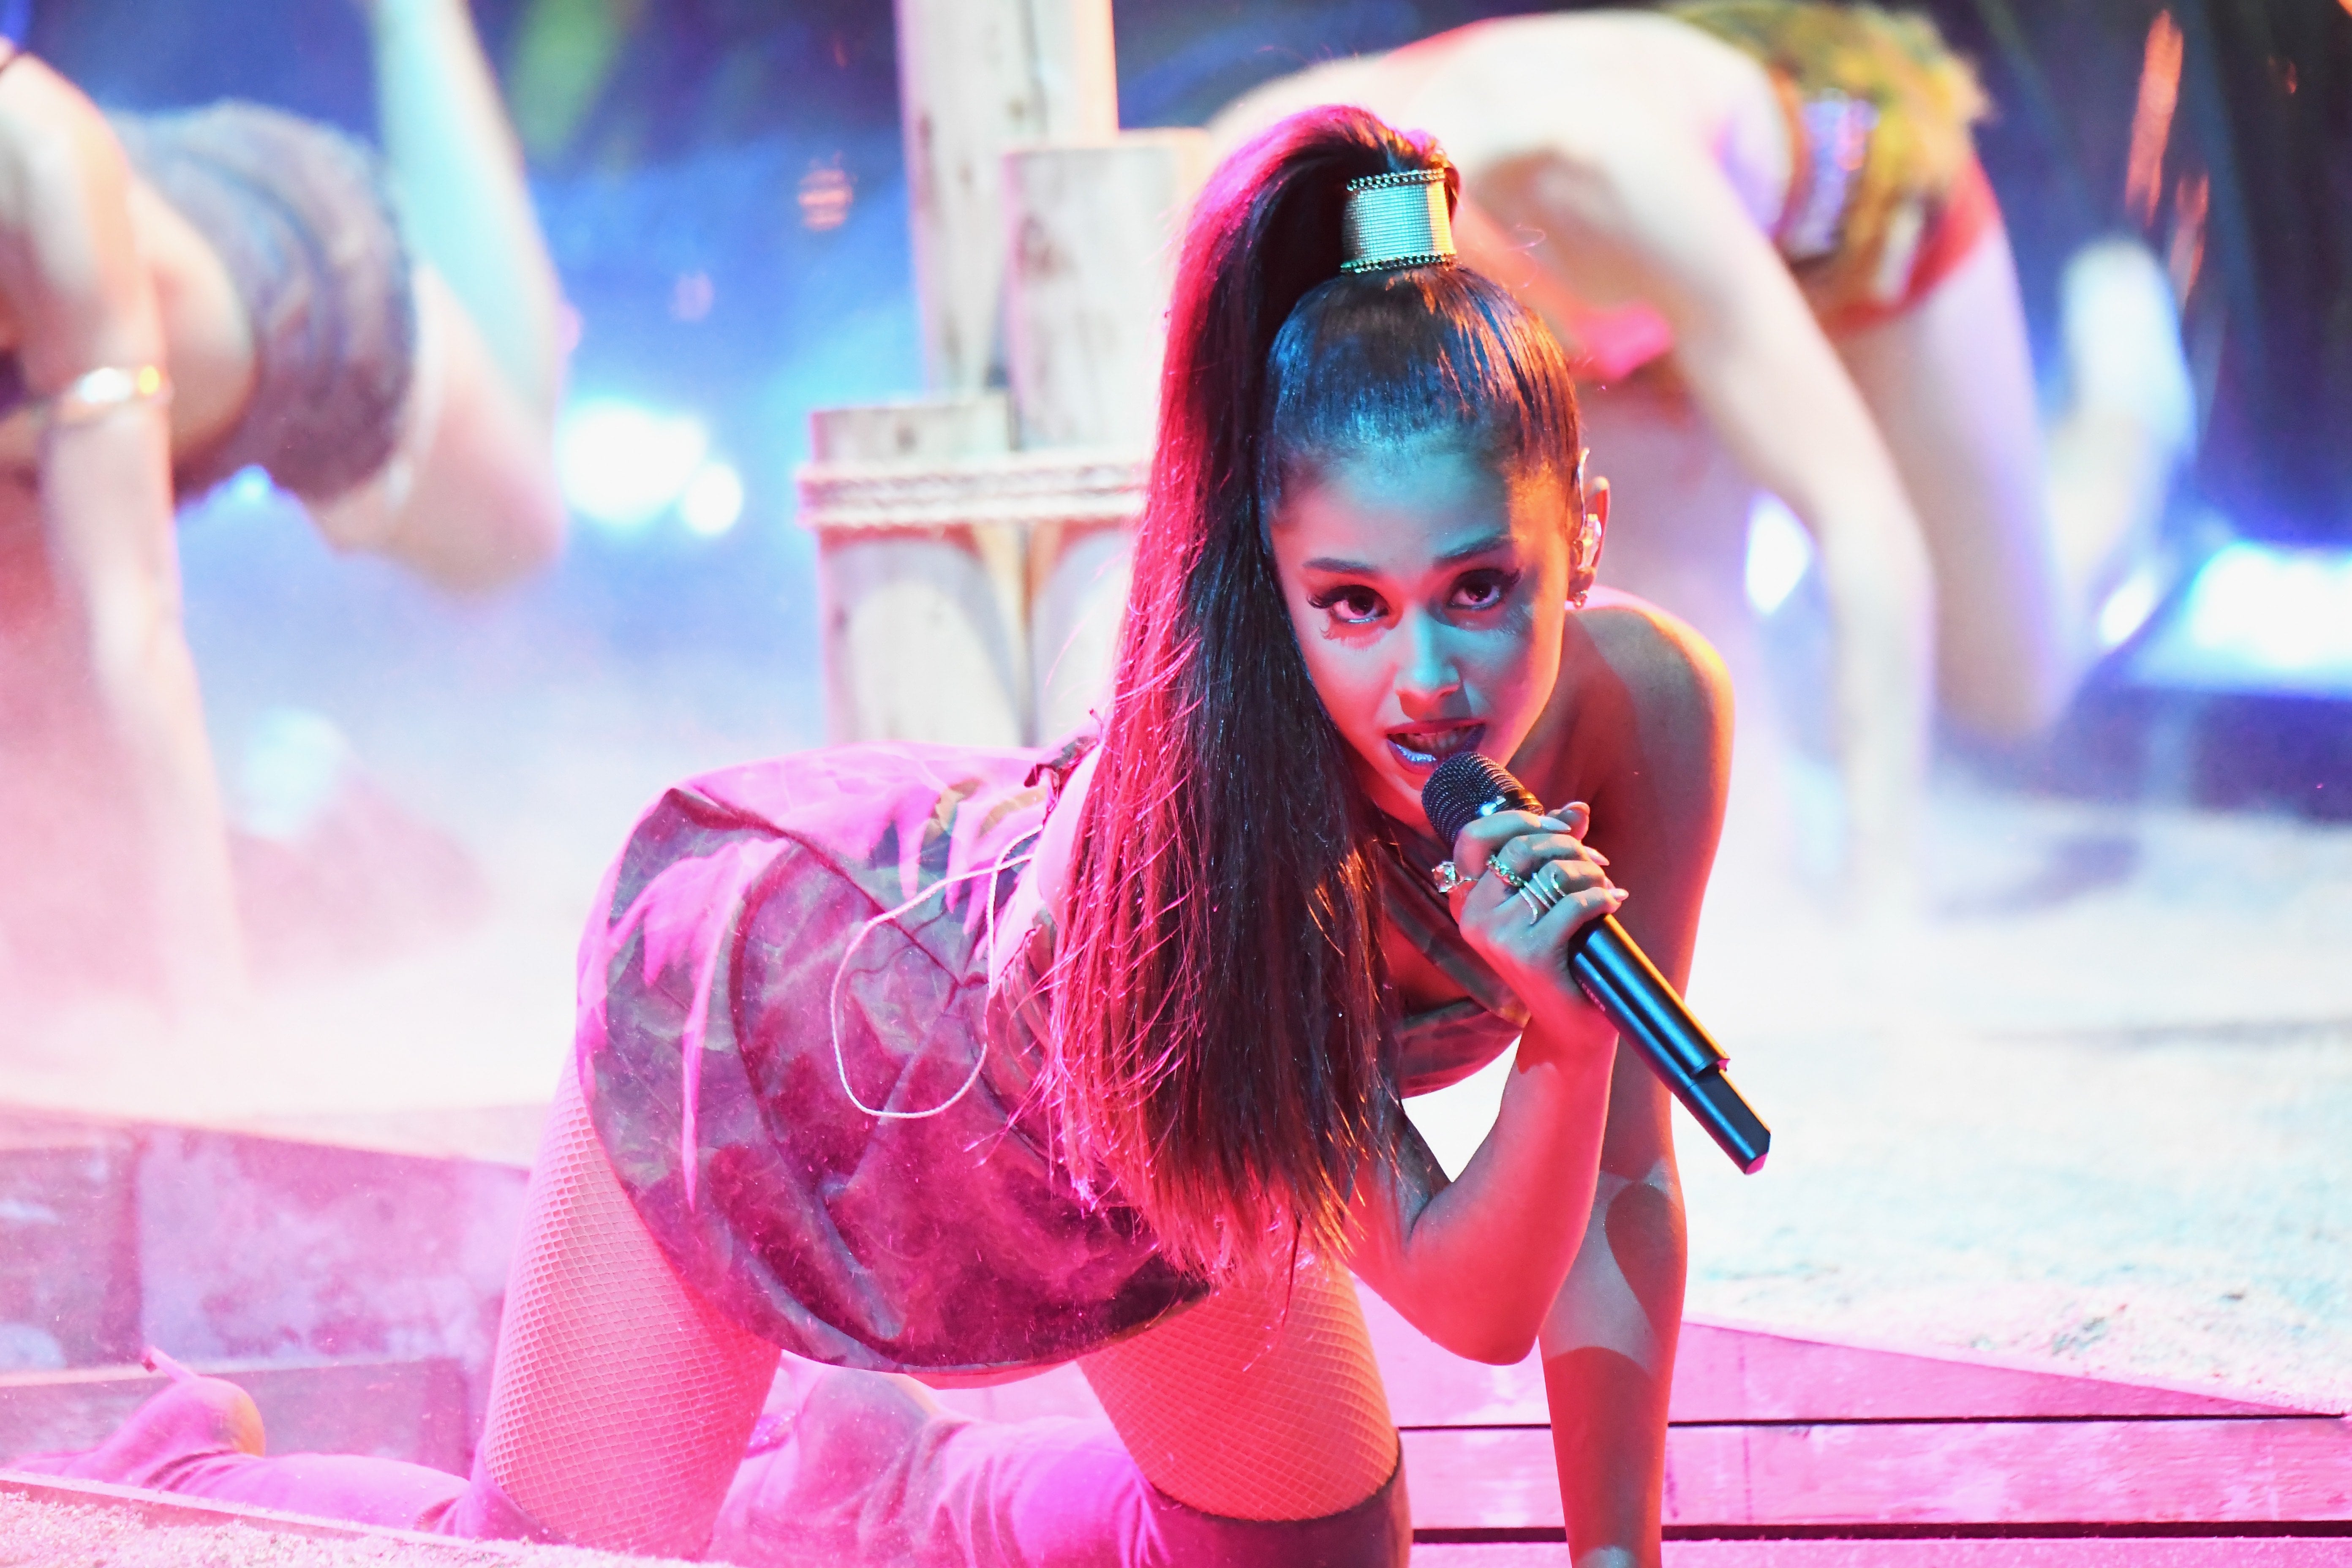 buss ya hussain recommends ariana grande almost naked pic